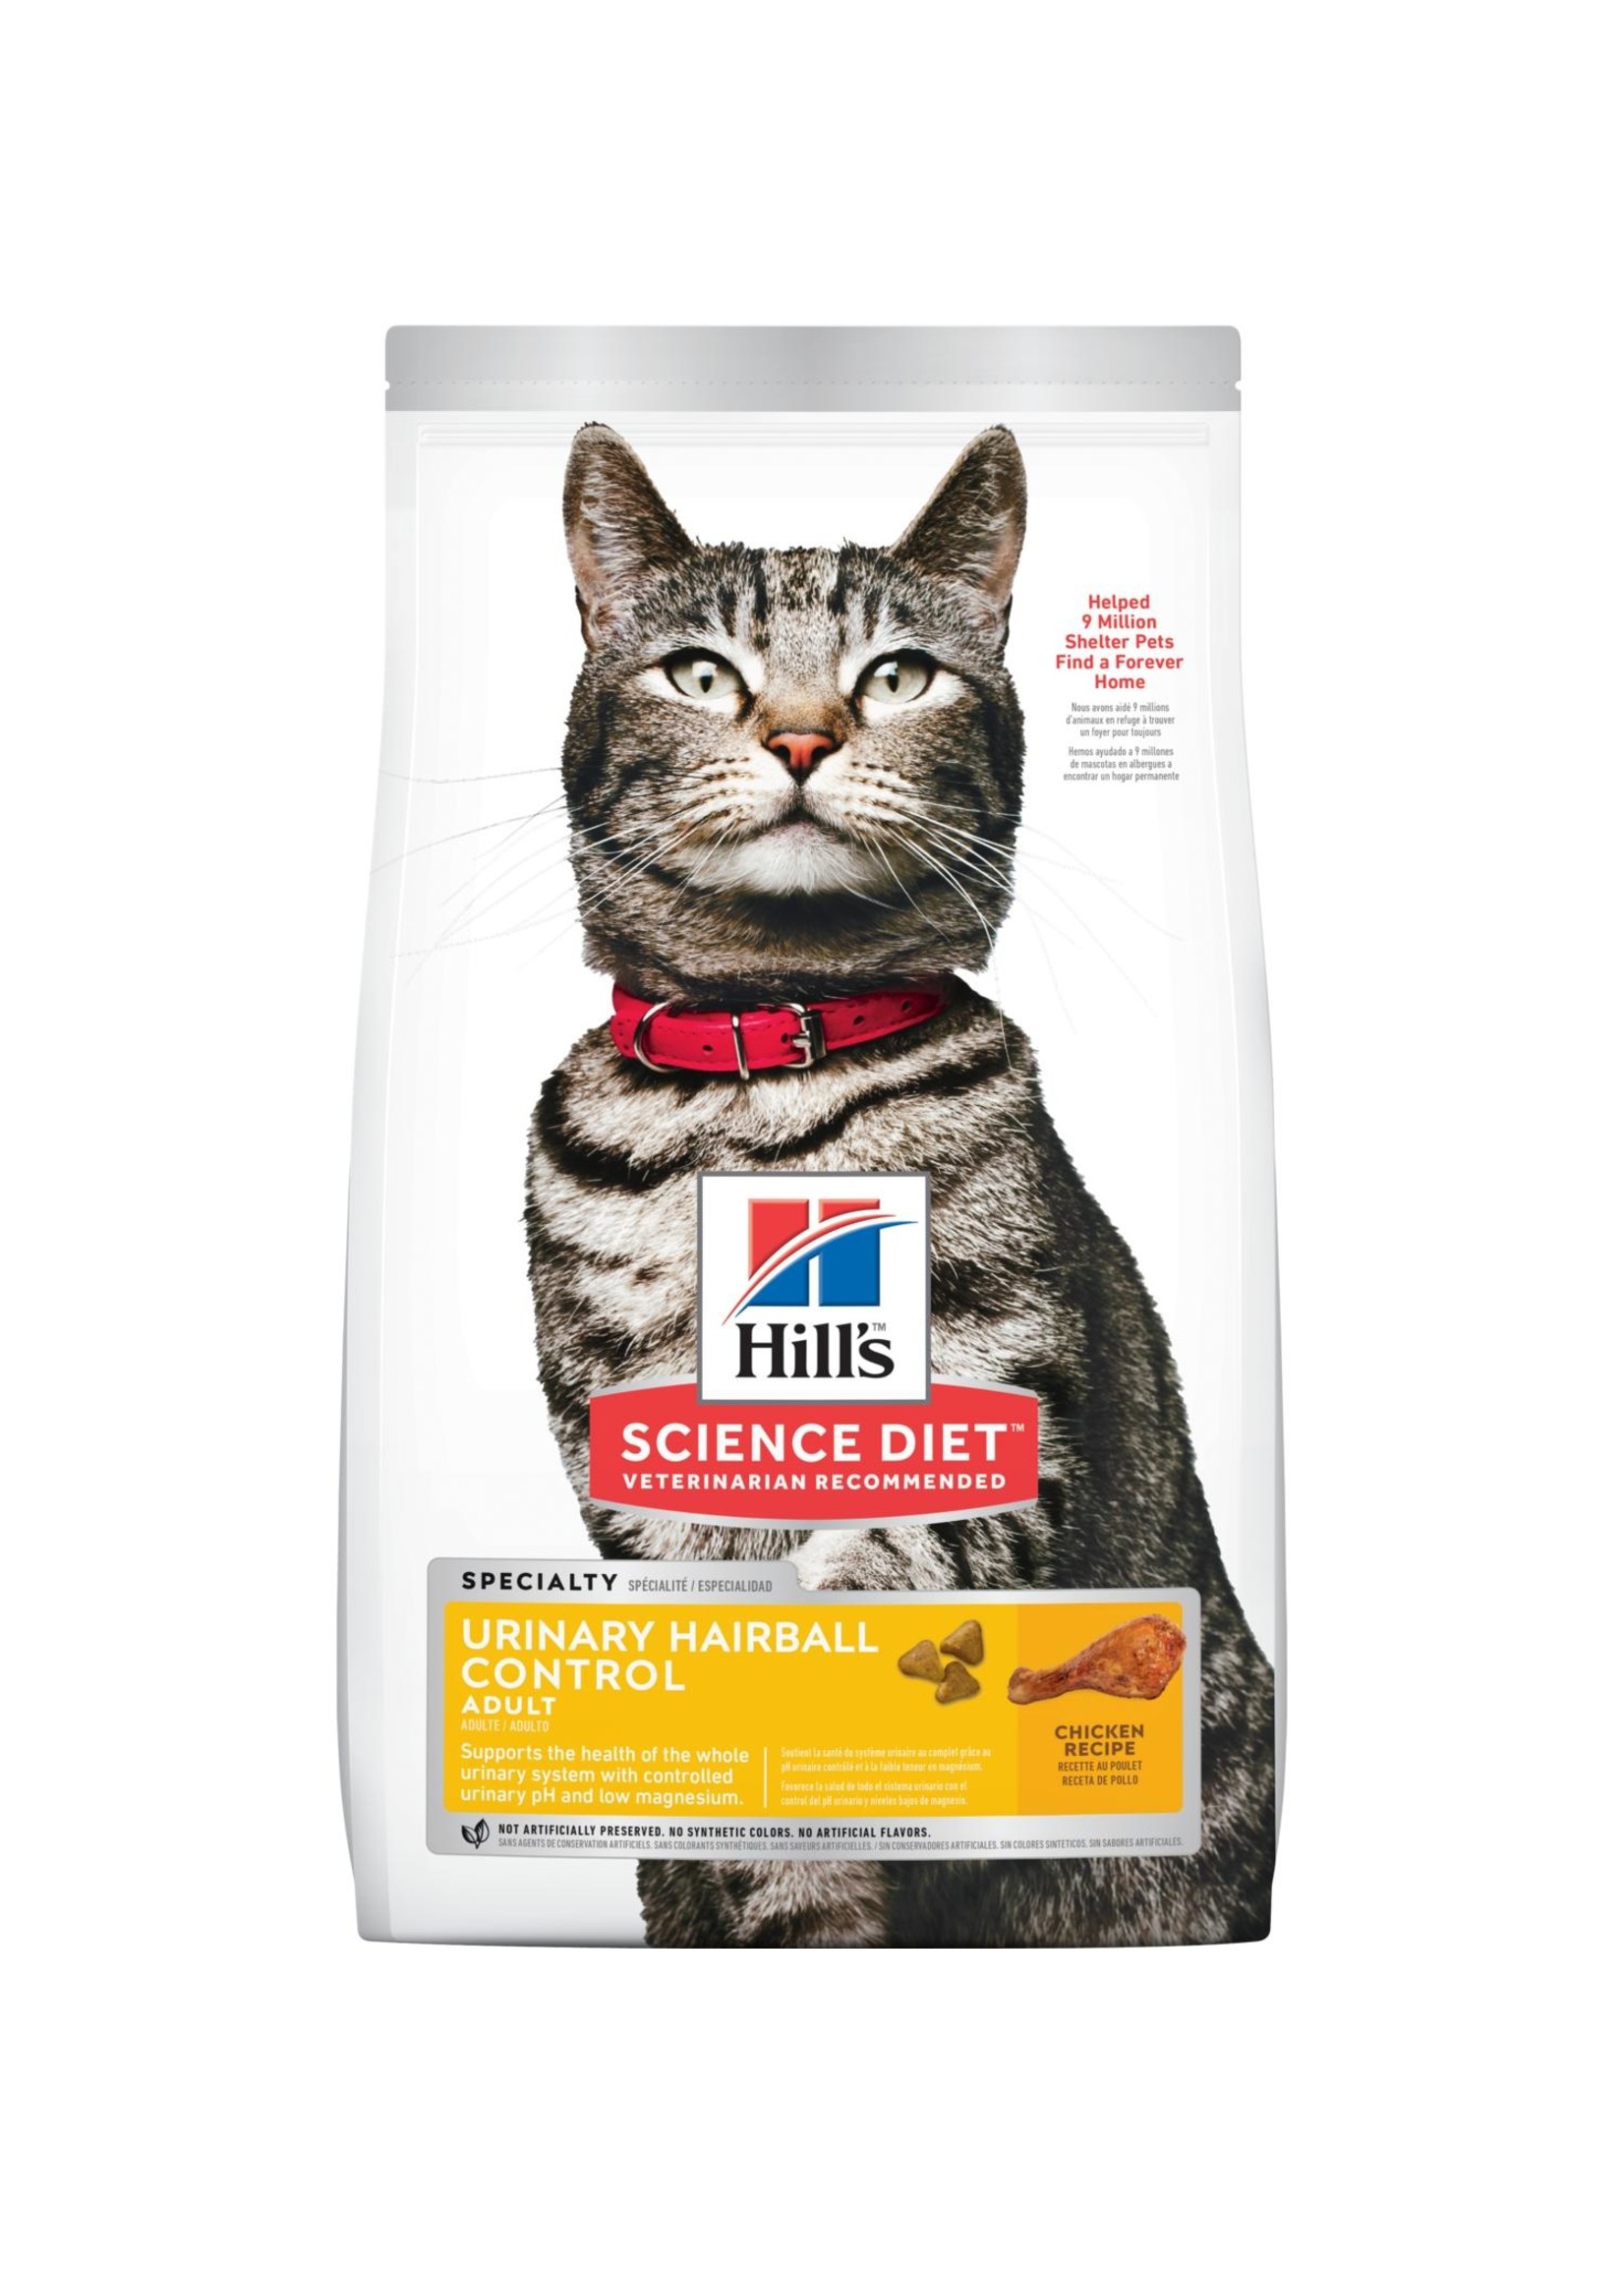 Hill's Science Diet Hill's Science Diet Adult Urinary & Hairball Control Cat Food, 7lb Bag